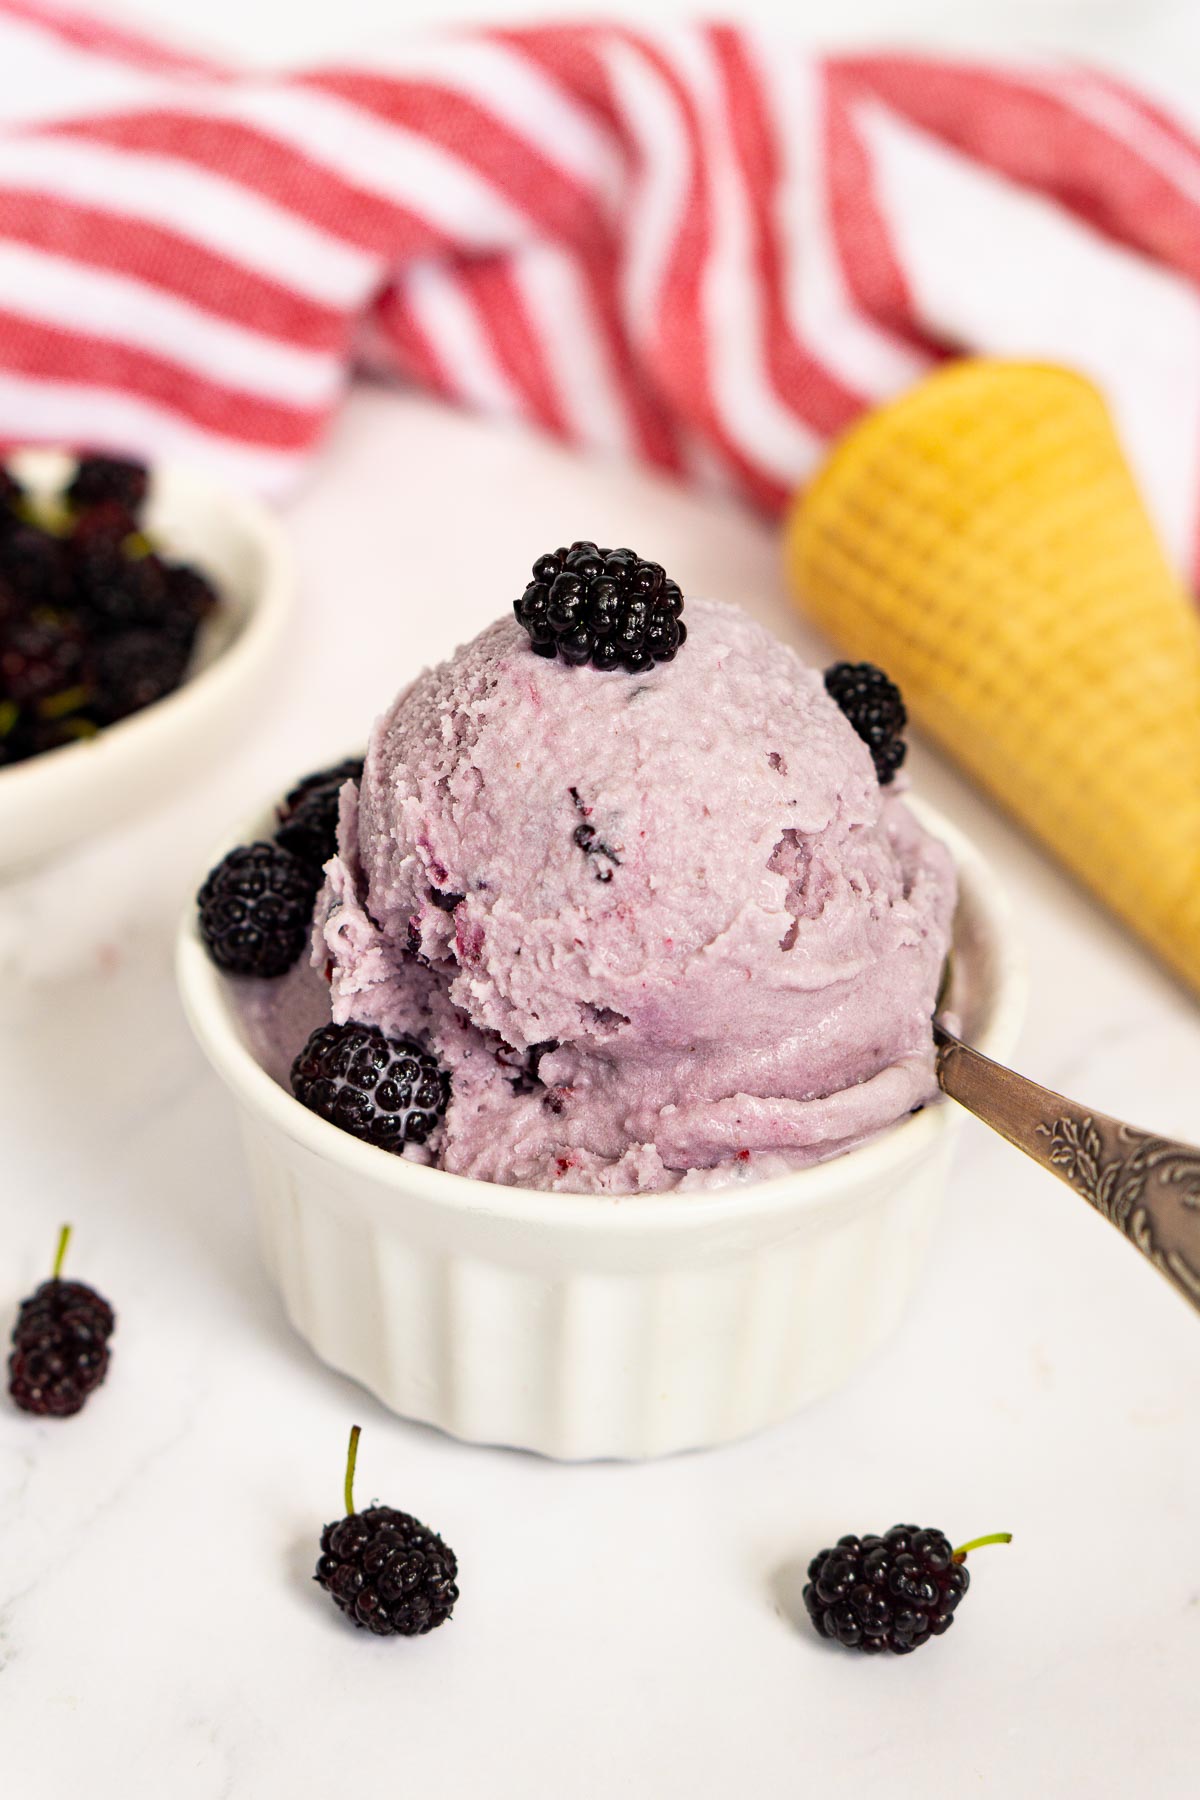 Bowl of homemade mulberry ice cream garnished with mulberries